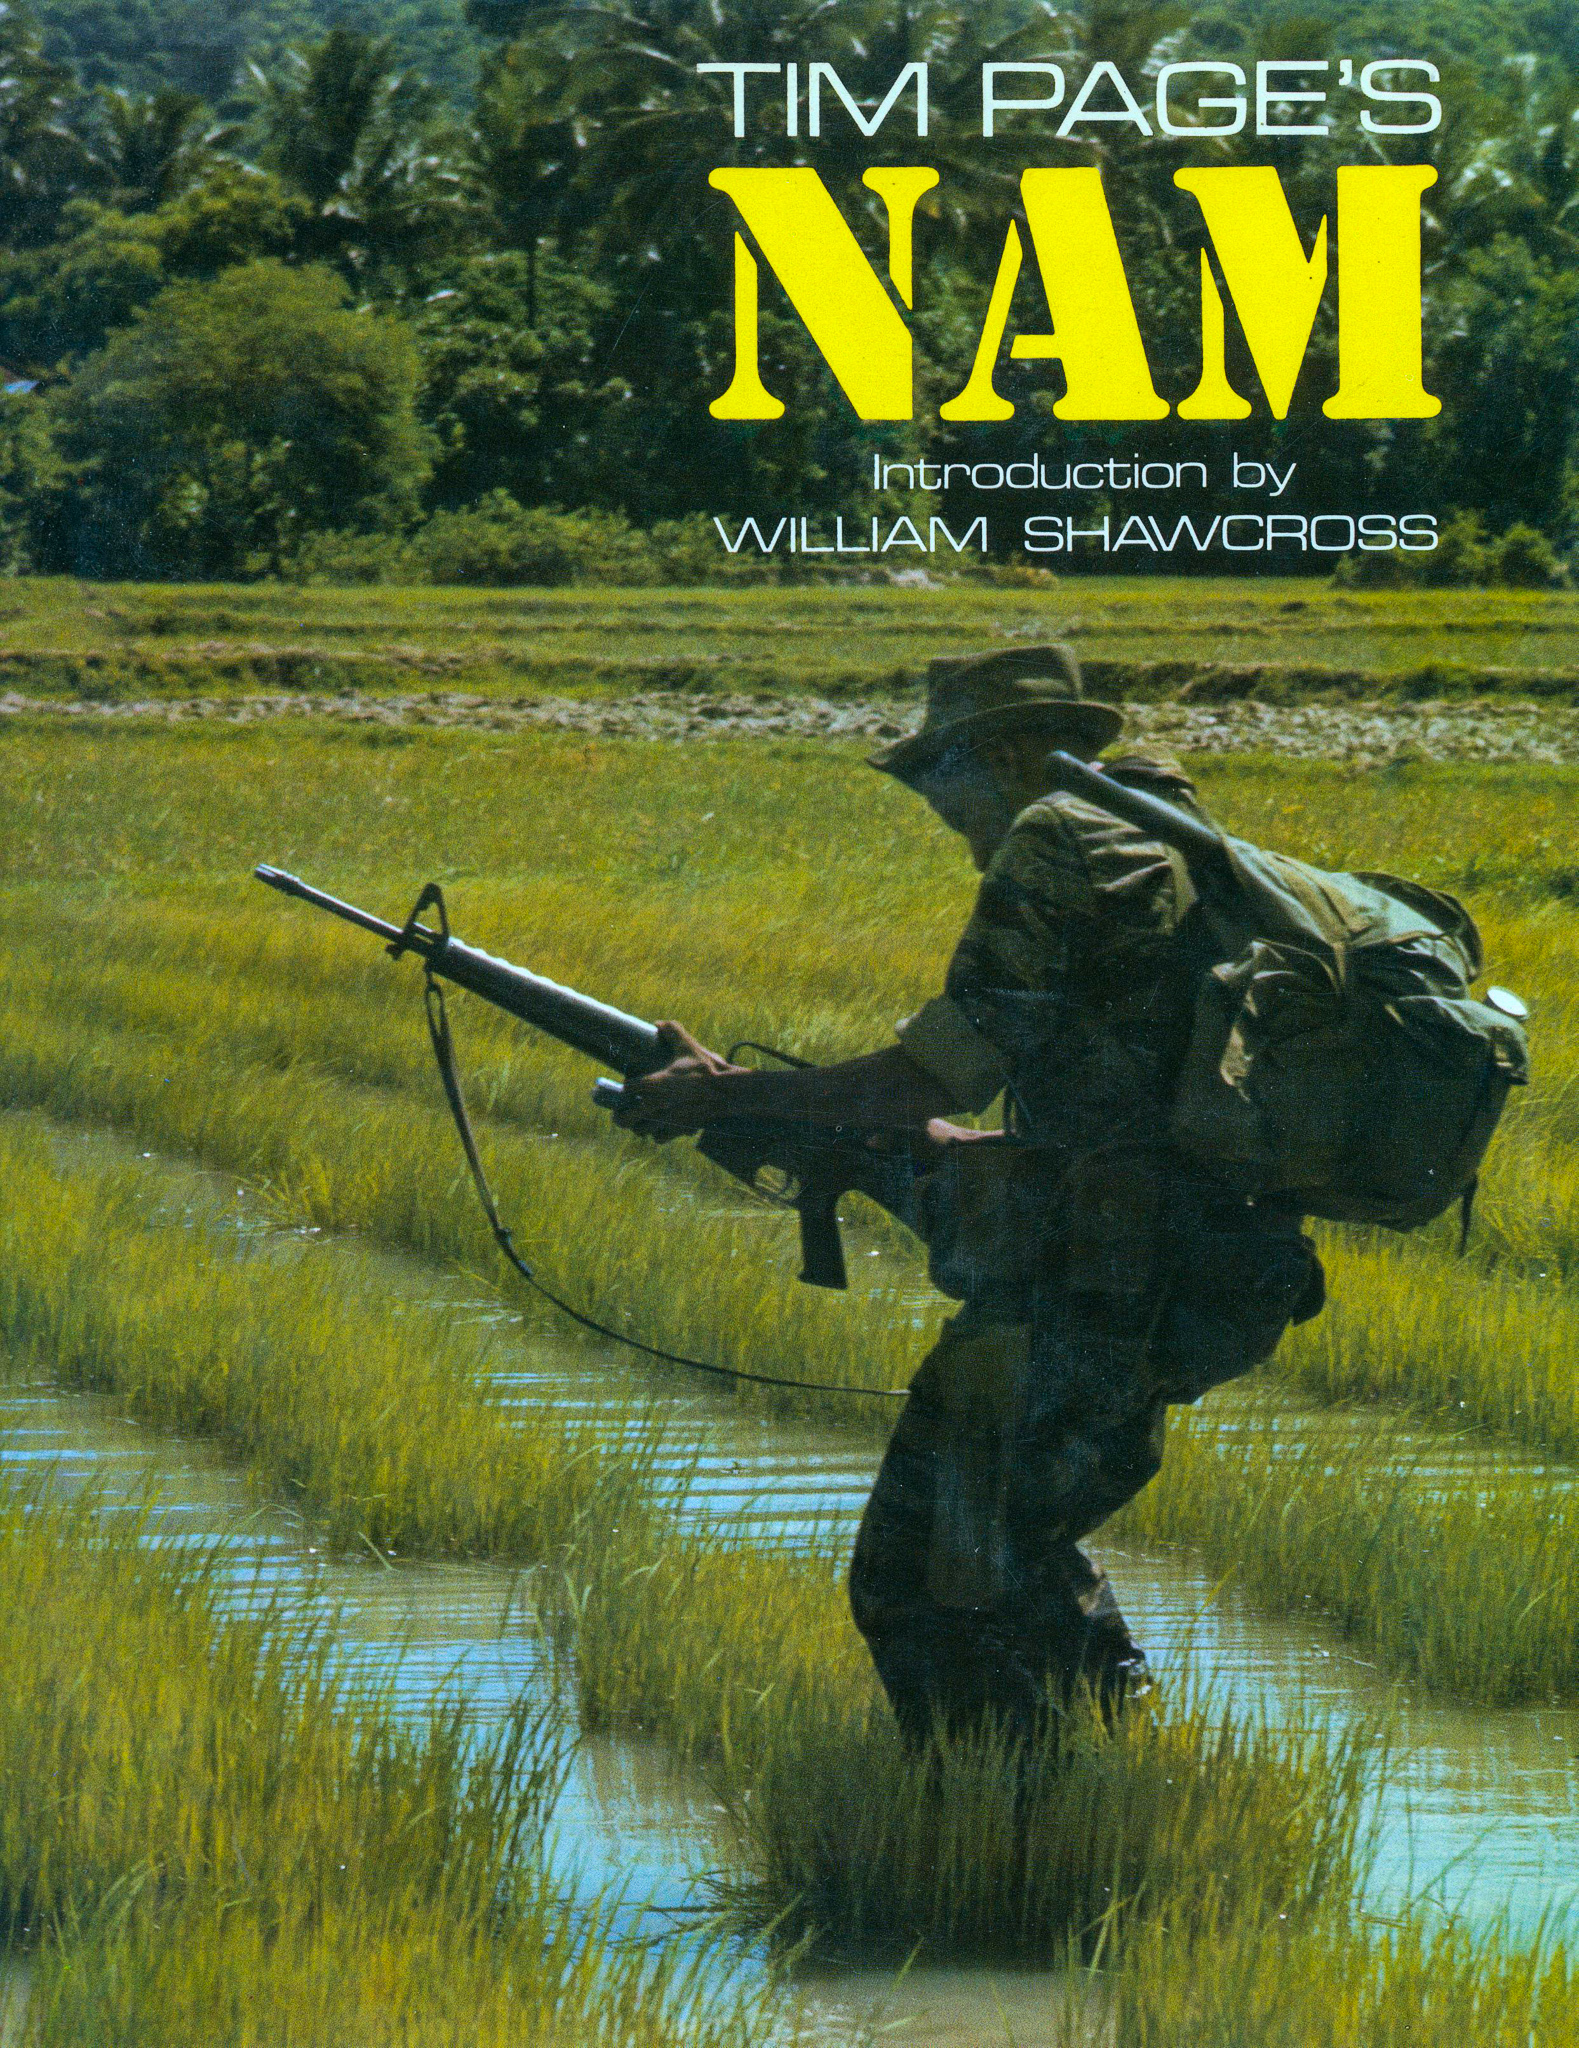 Tim Page's NAM book cover